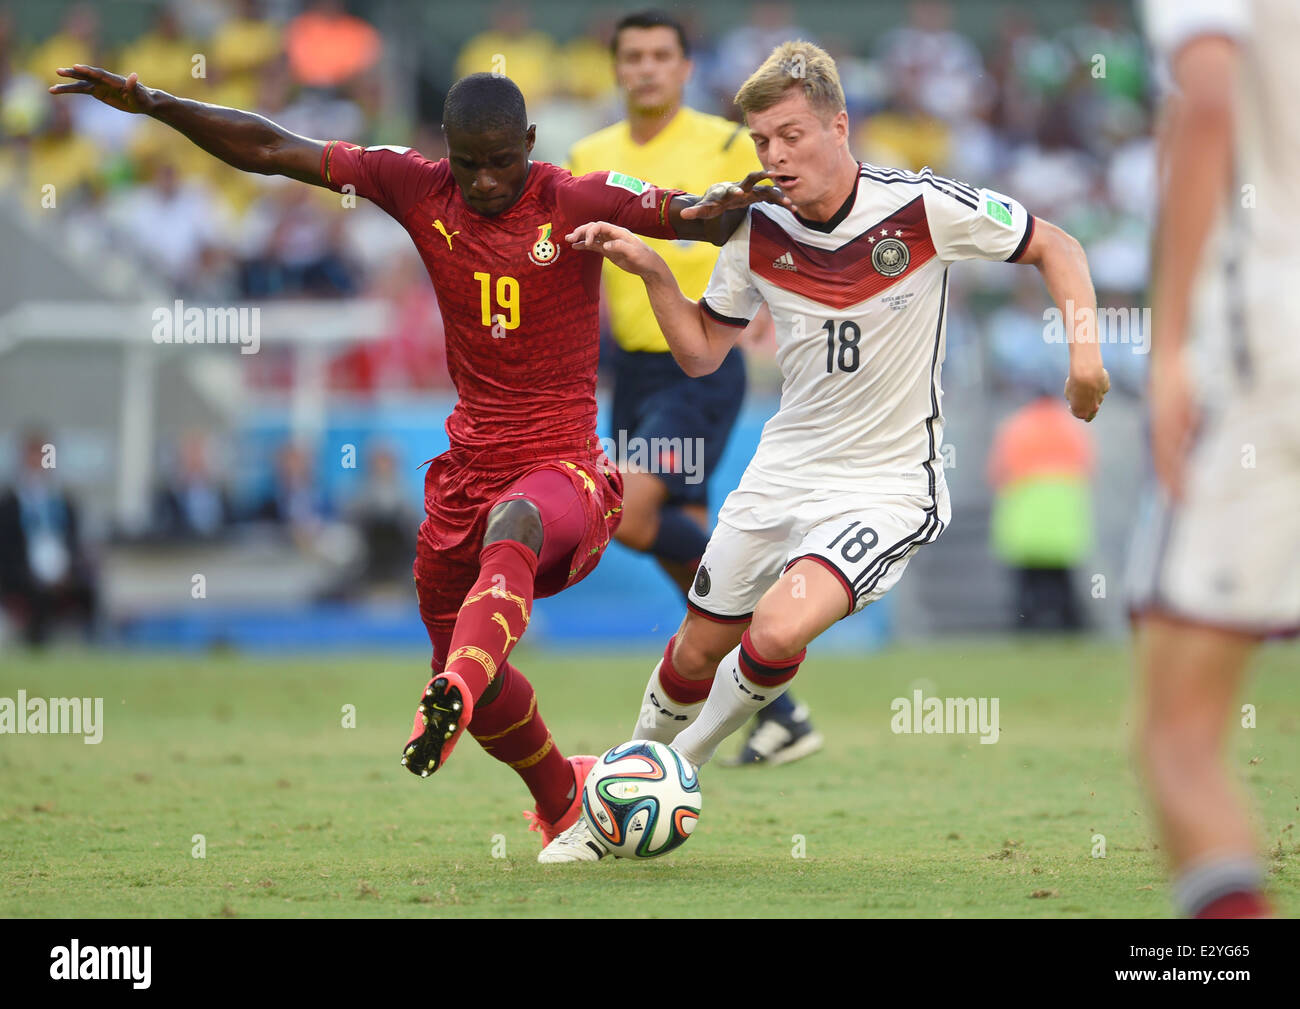 Fortaleza, Brazil. 21st June, 2014. Germany's Toni Kroos (R) and Ghana's Jonathan Mensah vie for the ball during the FIFA World Cup 2014 group G preliminary round match between Germany and Ghana at the Estadio Castelao Stadium in Fortaleza, Brazil, 21 June 2014. Photo: Andreas Gebert/dpa/Alamy Live News Stock Photo